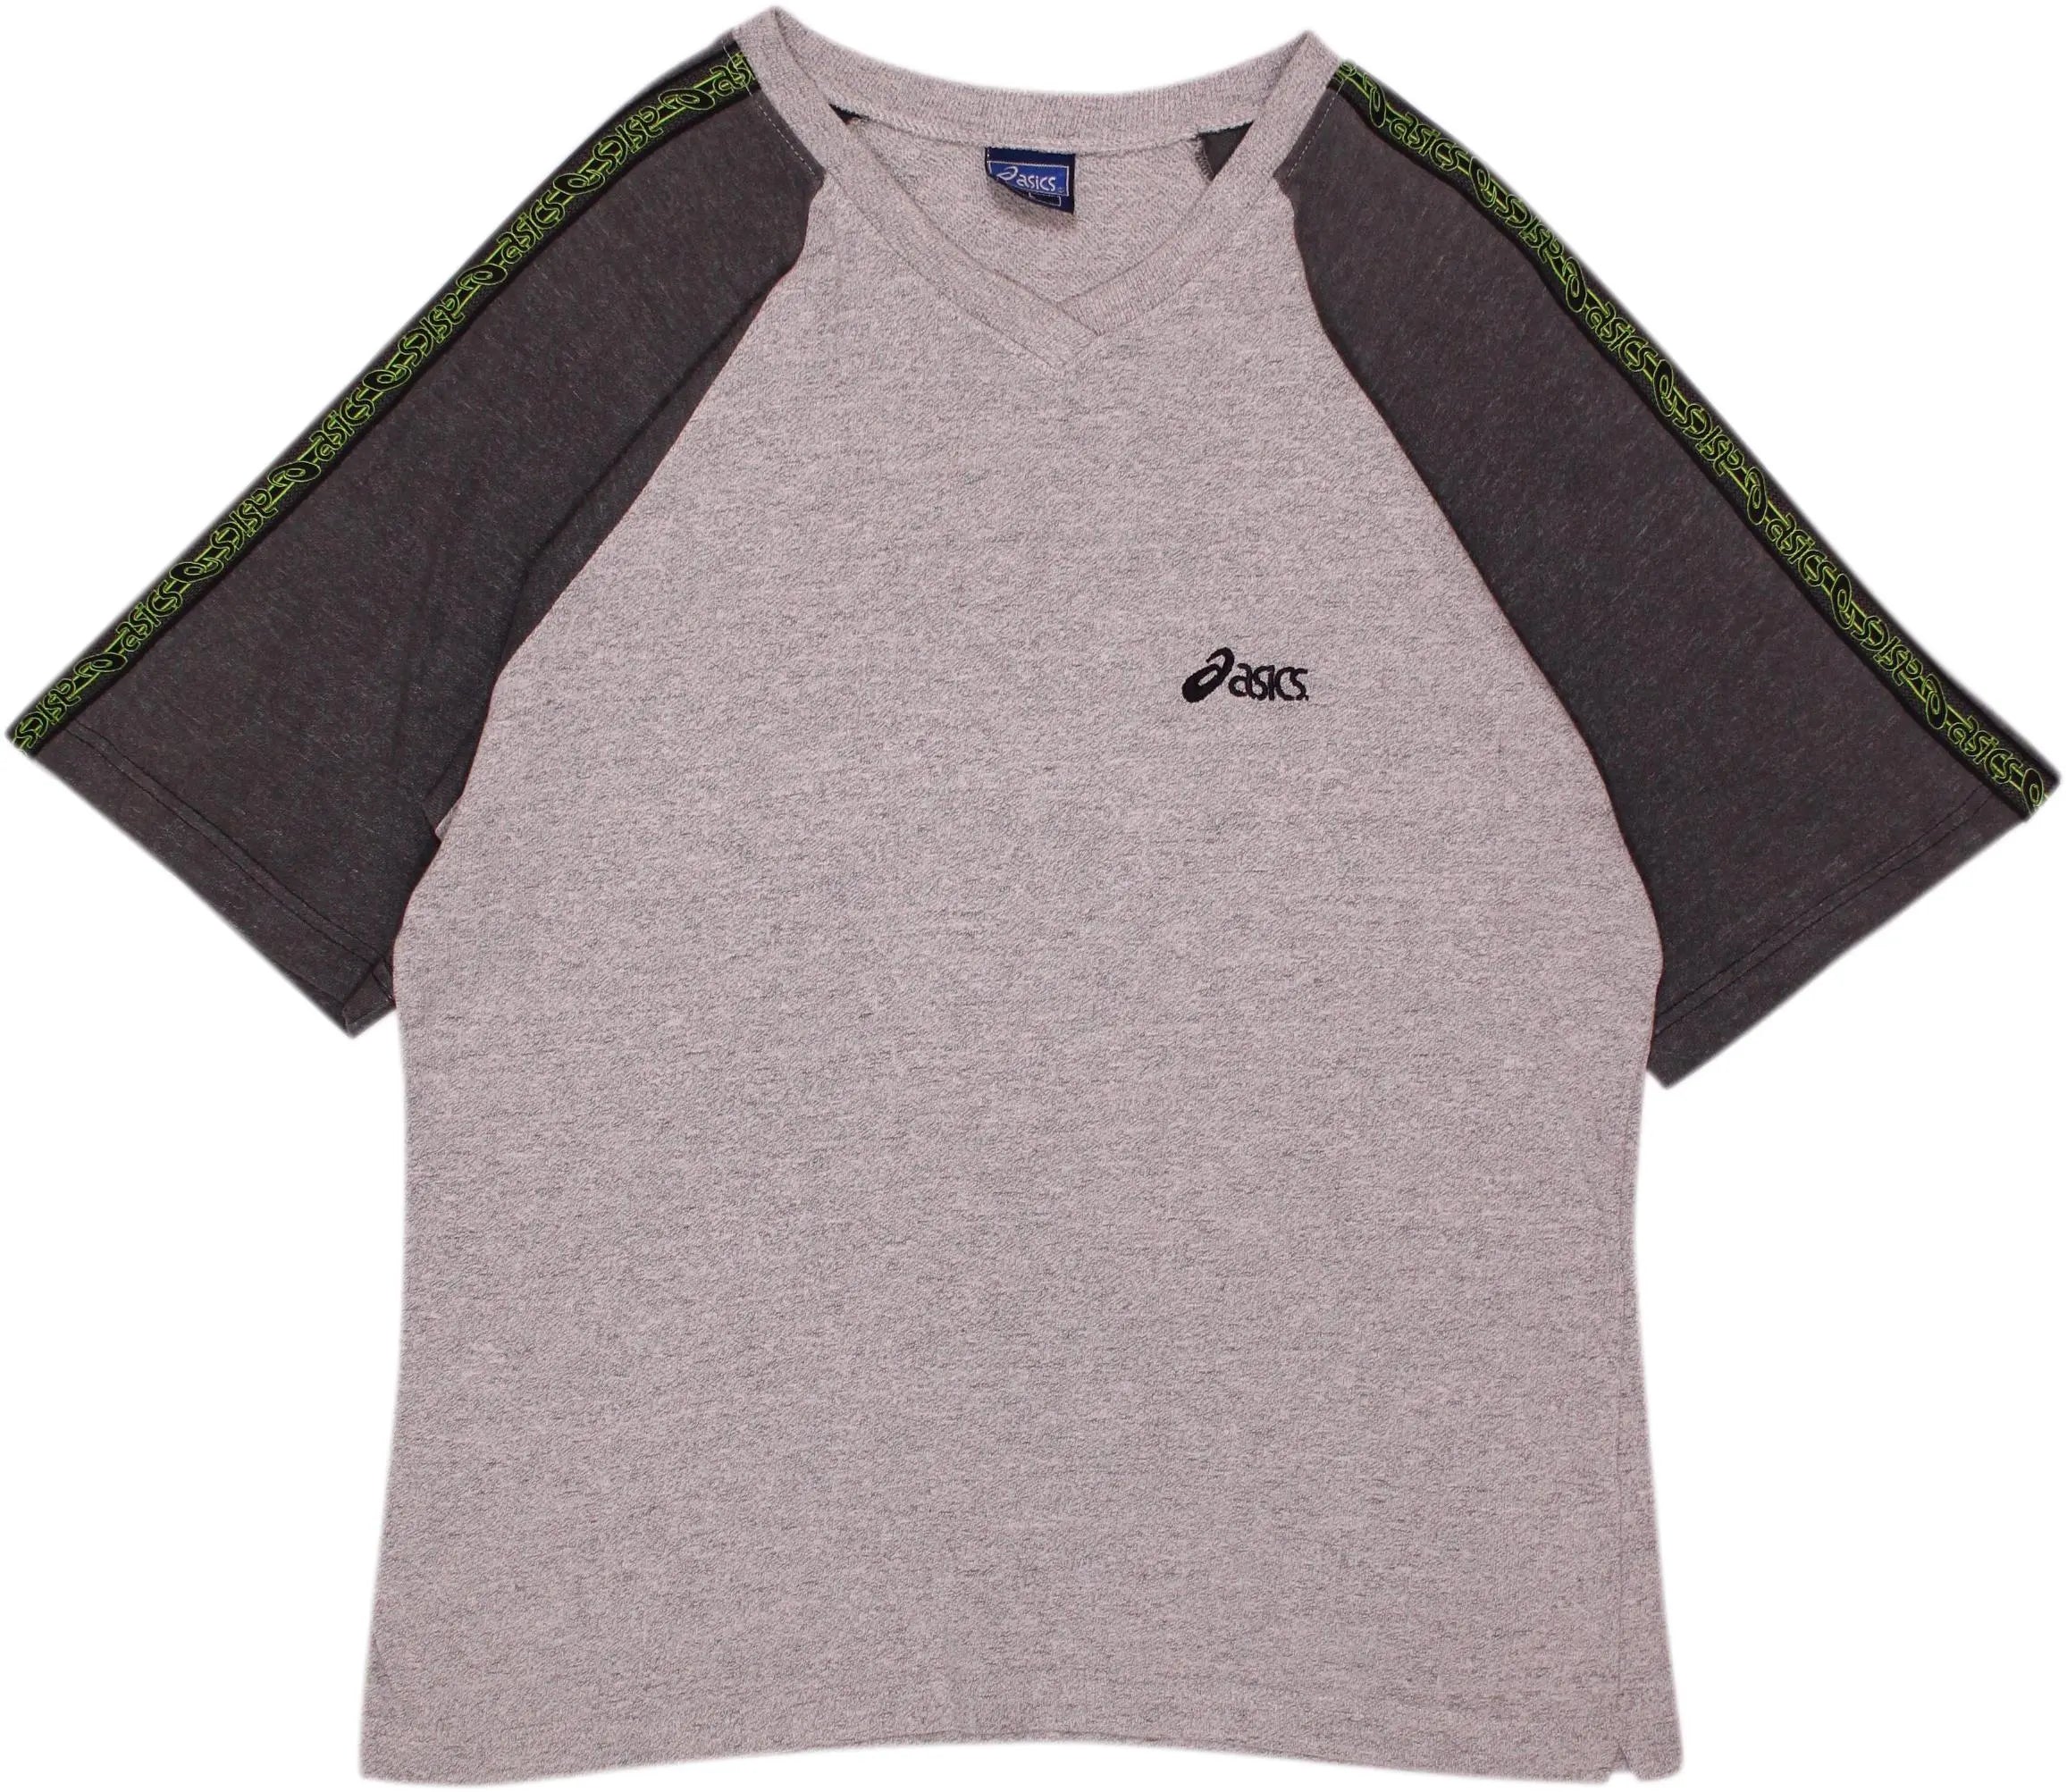 Asics - Grey T-shirt by Asics- ThriftTale.com - Vintage and second handclothing